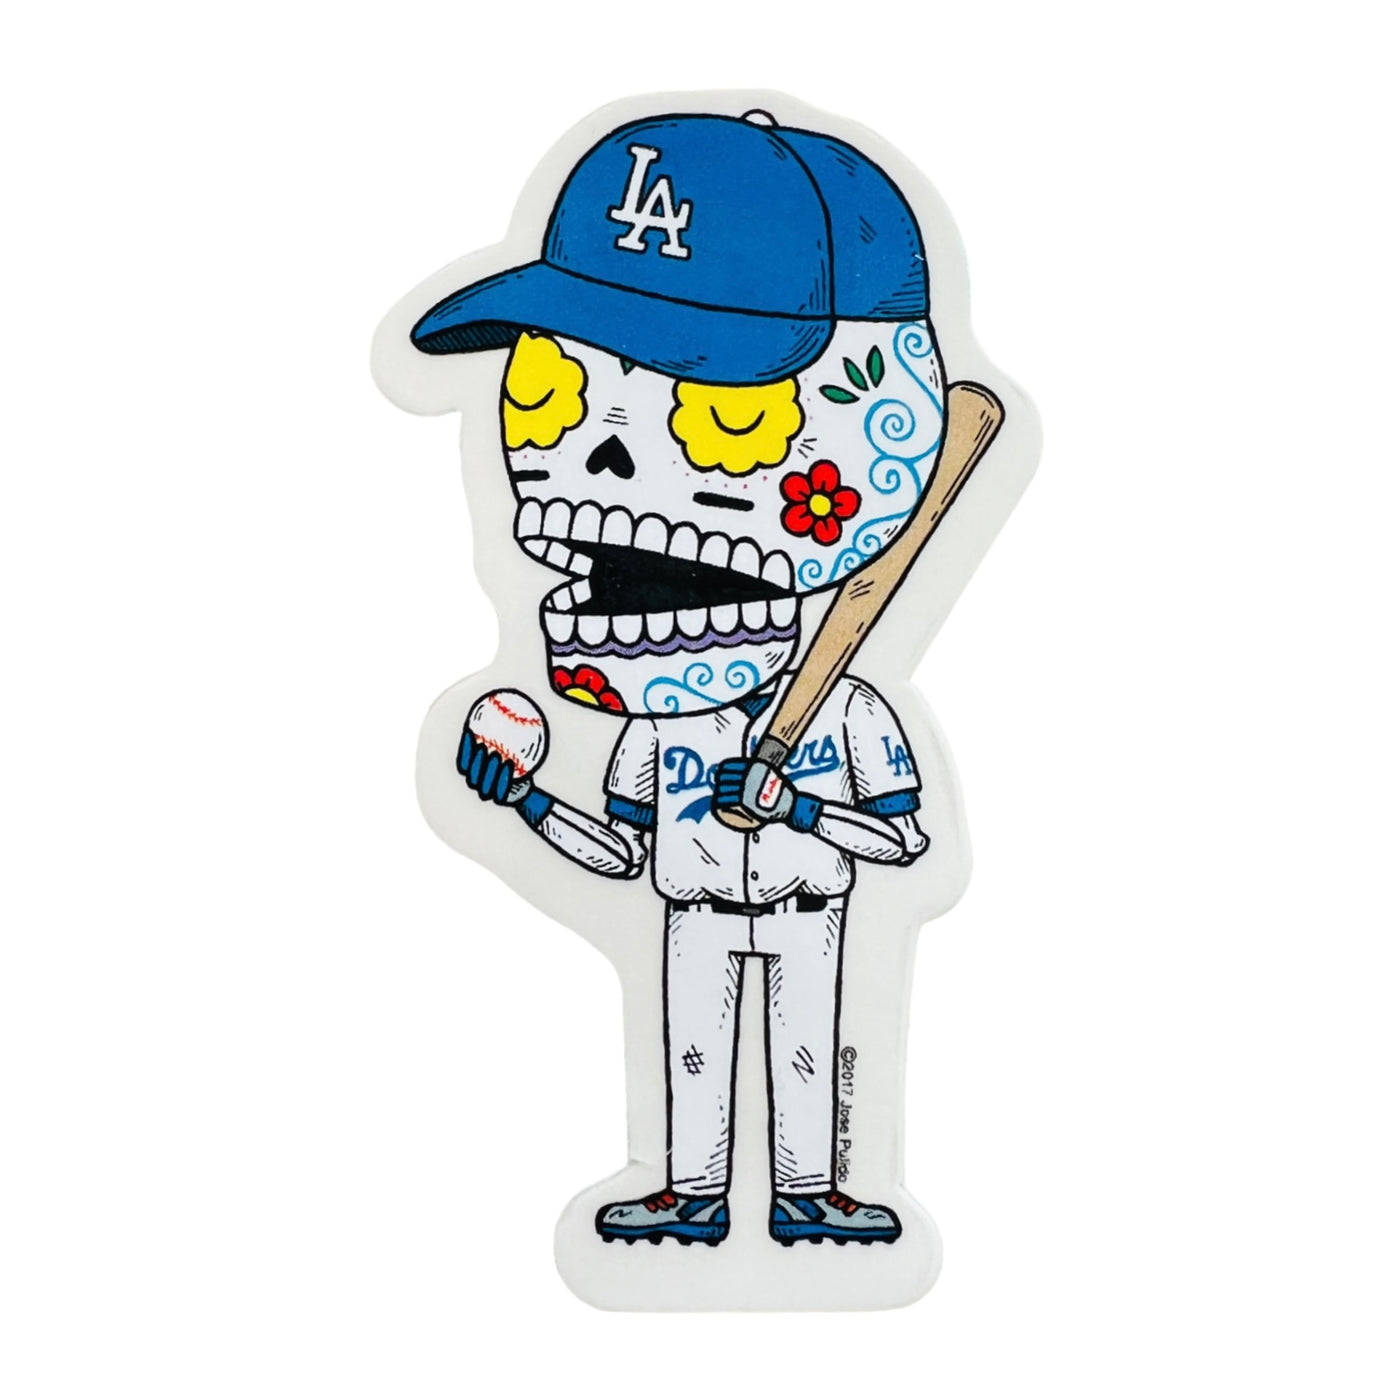 LA baseball player in the style of a calavera (skeleton).